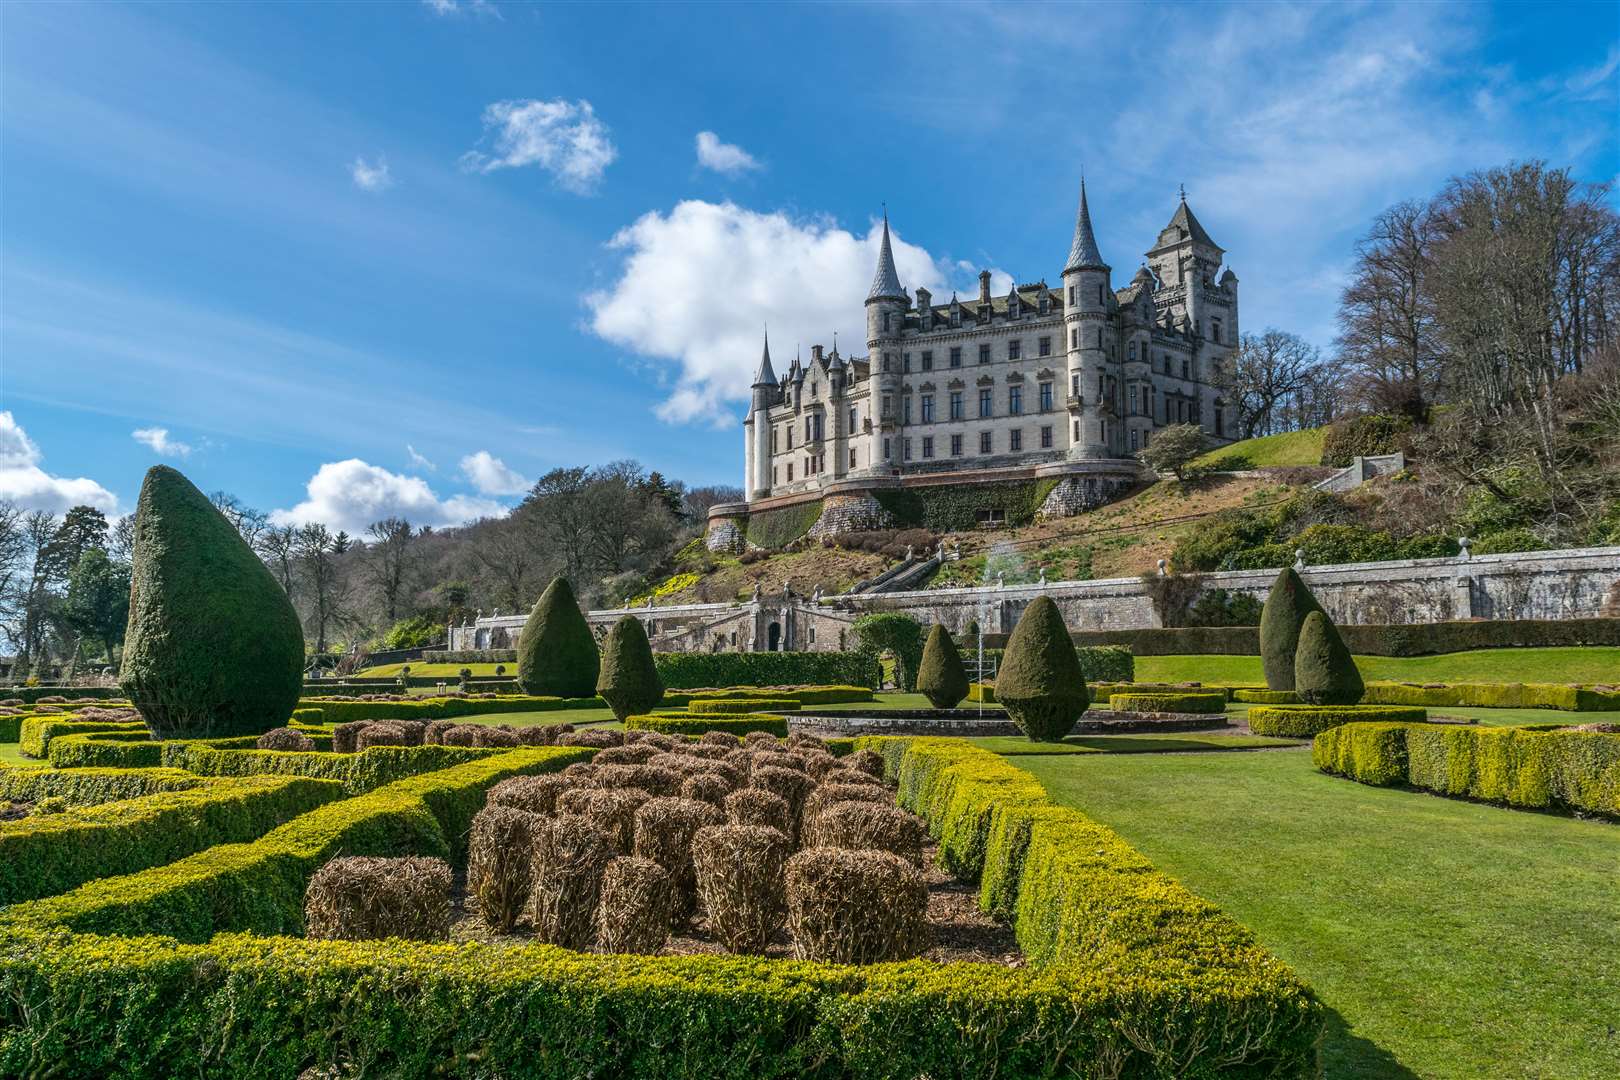 The prize will be awarded at Dunrobin Castle.